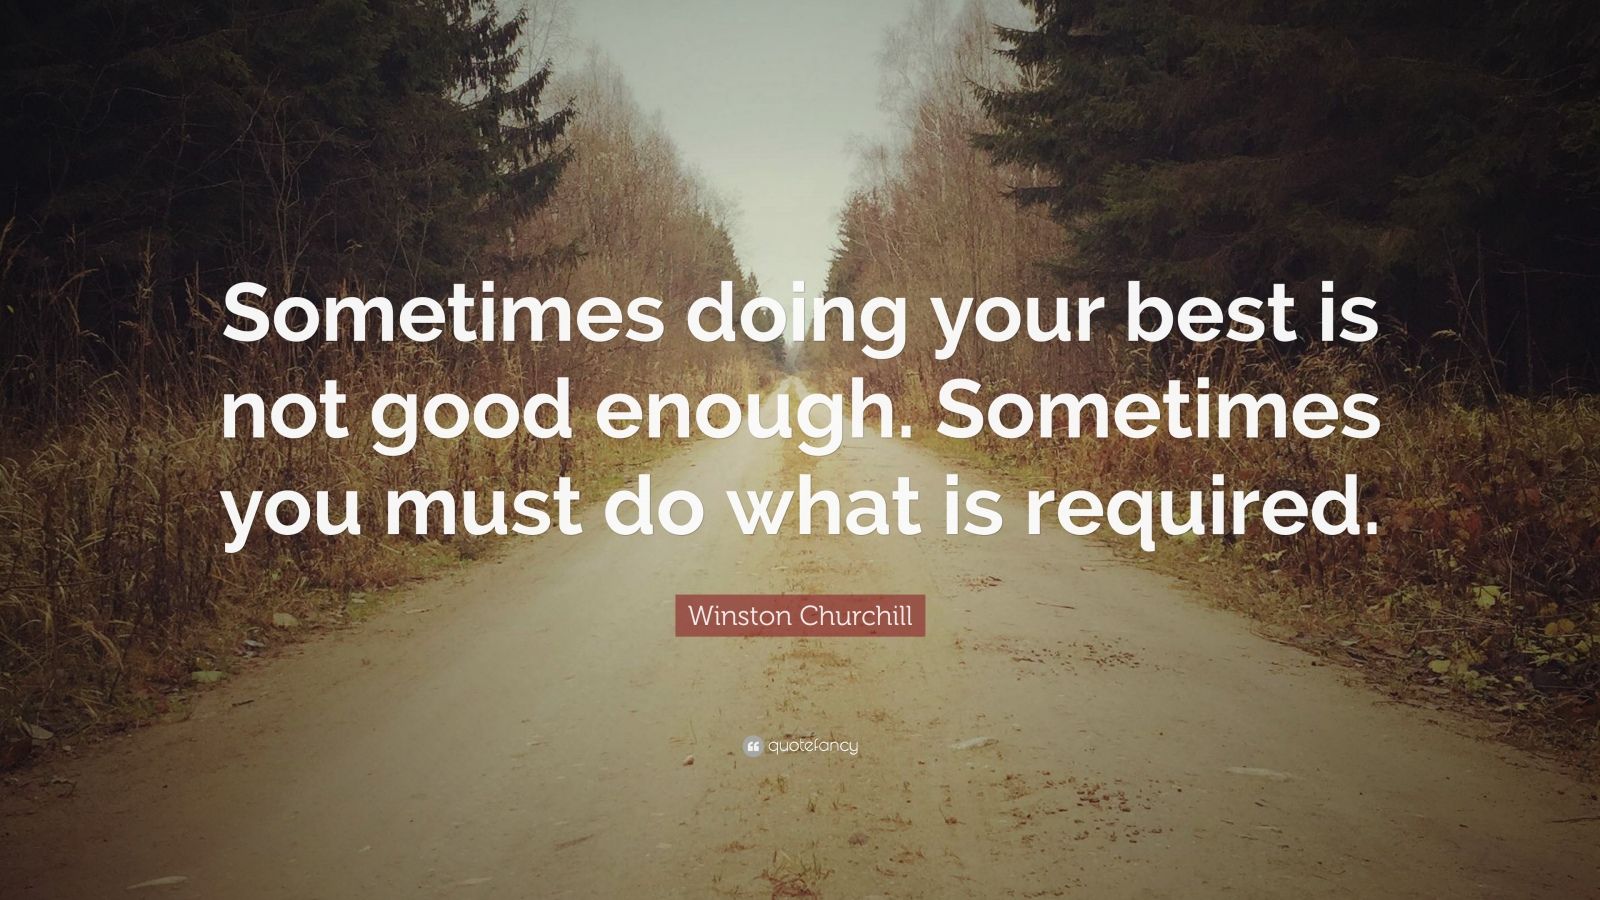 Winston Churchill Quote: “Sometimes doing your best is not good enough